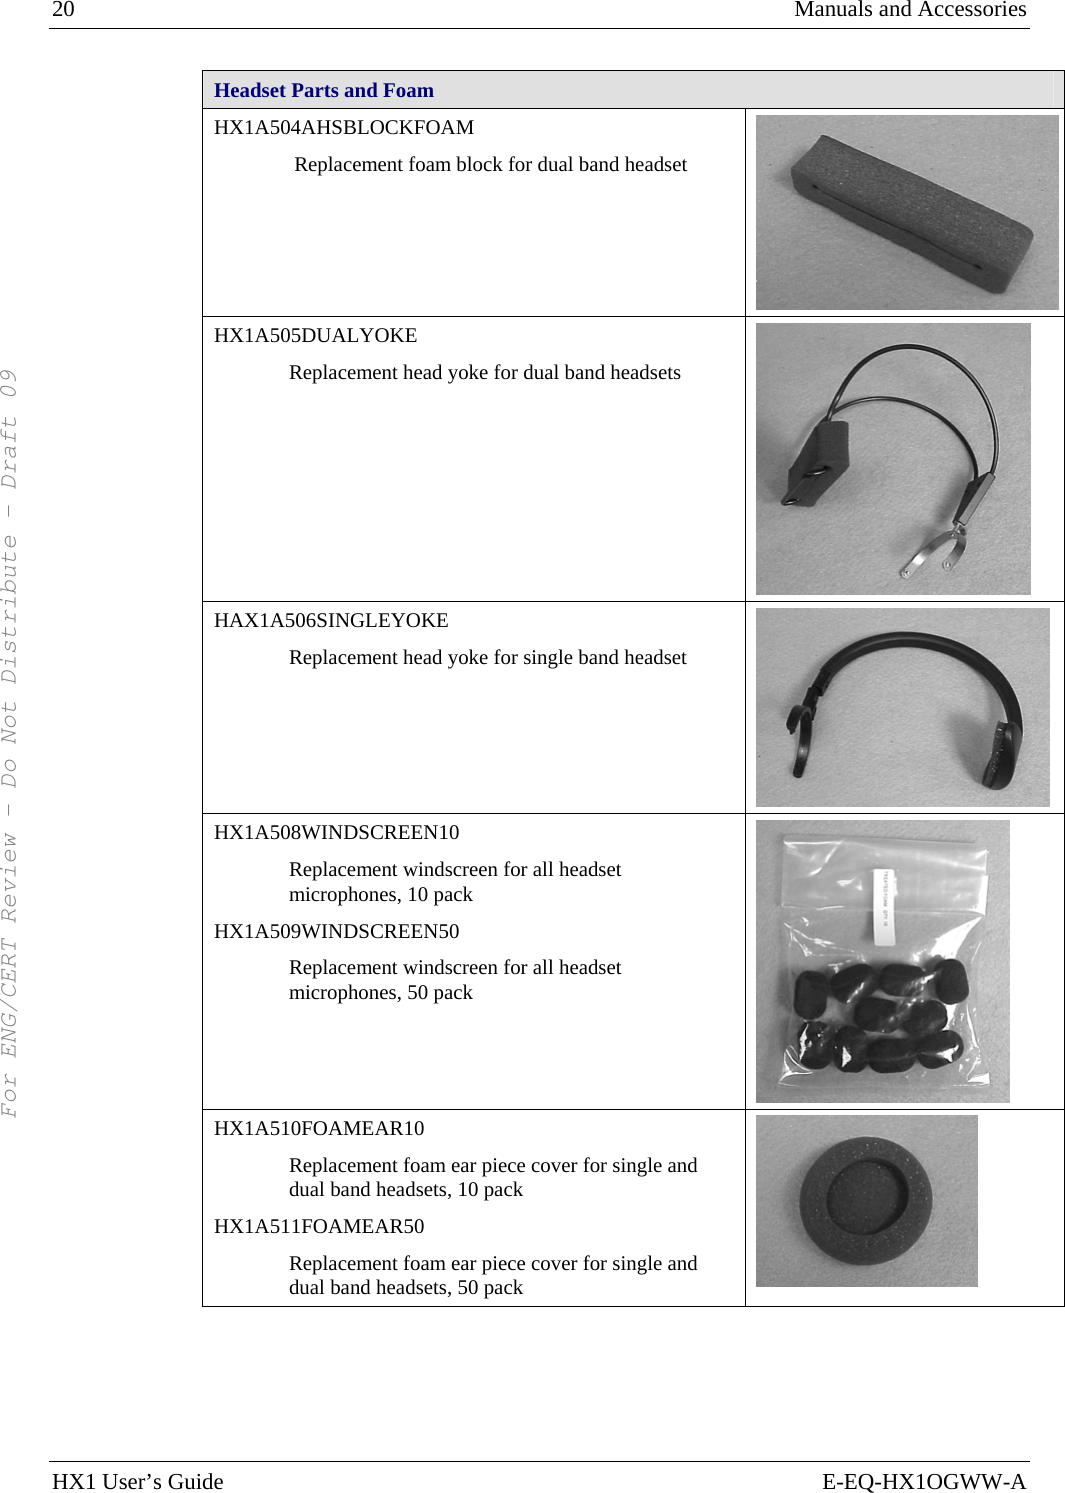 20  Manuals and Accessories HX1 User’s Guide  E-EQ-HX1OGWW-A Headset Parts and Foam HX1A504AHSBLOCKFOAM  Replacement foam block for dual band headset HX1A505DUALYOKE Replacement head yoke for dual band headsets  HAX1A506SINGLEYOKE Replacement head yoke for single band headset  HX1A508WINDSCREEN10 Replacement windscreen for all headset microphones, 10 pack HX1A509WINDSCREEN50 Replacement windscreen for all headset microphones, 50 pack  HX1A510FOAMEAR10 Replacement foam ear piece cover for single and dual band headsets, 10 pack HX1A511FOAMEAR50 Replacement foam ear piece cover for single and dual band headsets, 50 pack    For ENG/CERT Review - Do Not Distribute - Draft 09